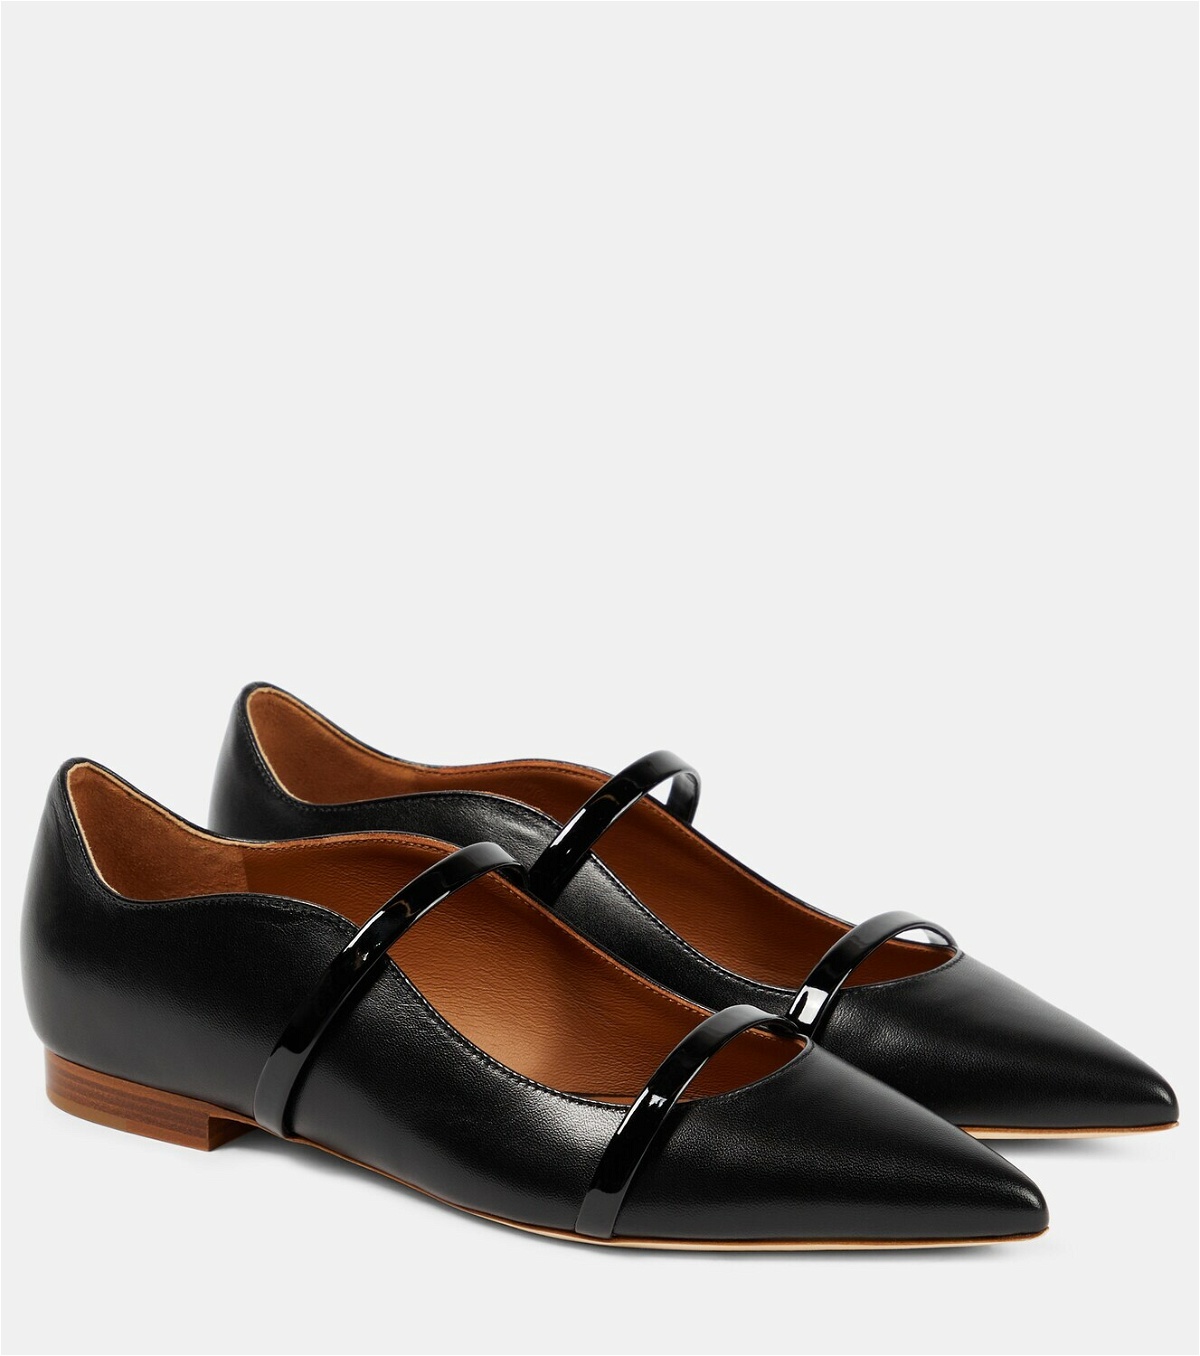 Malone Souliers Maureen leather ballet flats Malone Souliers